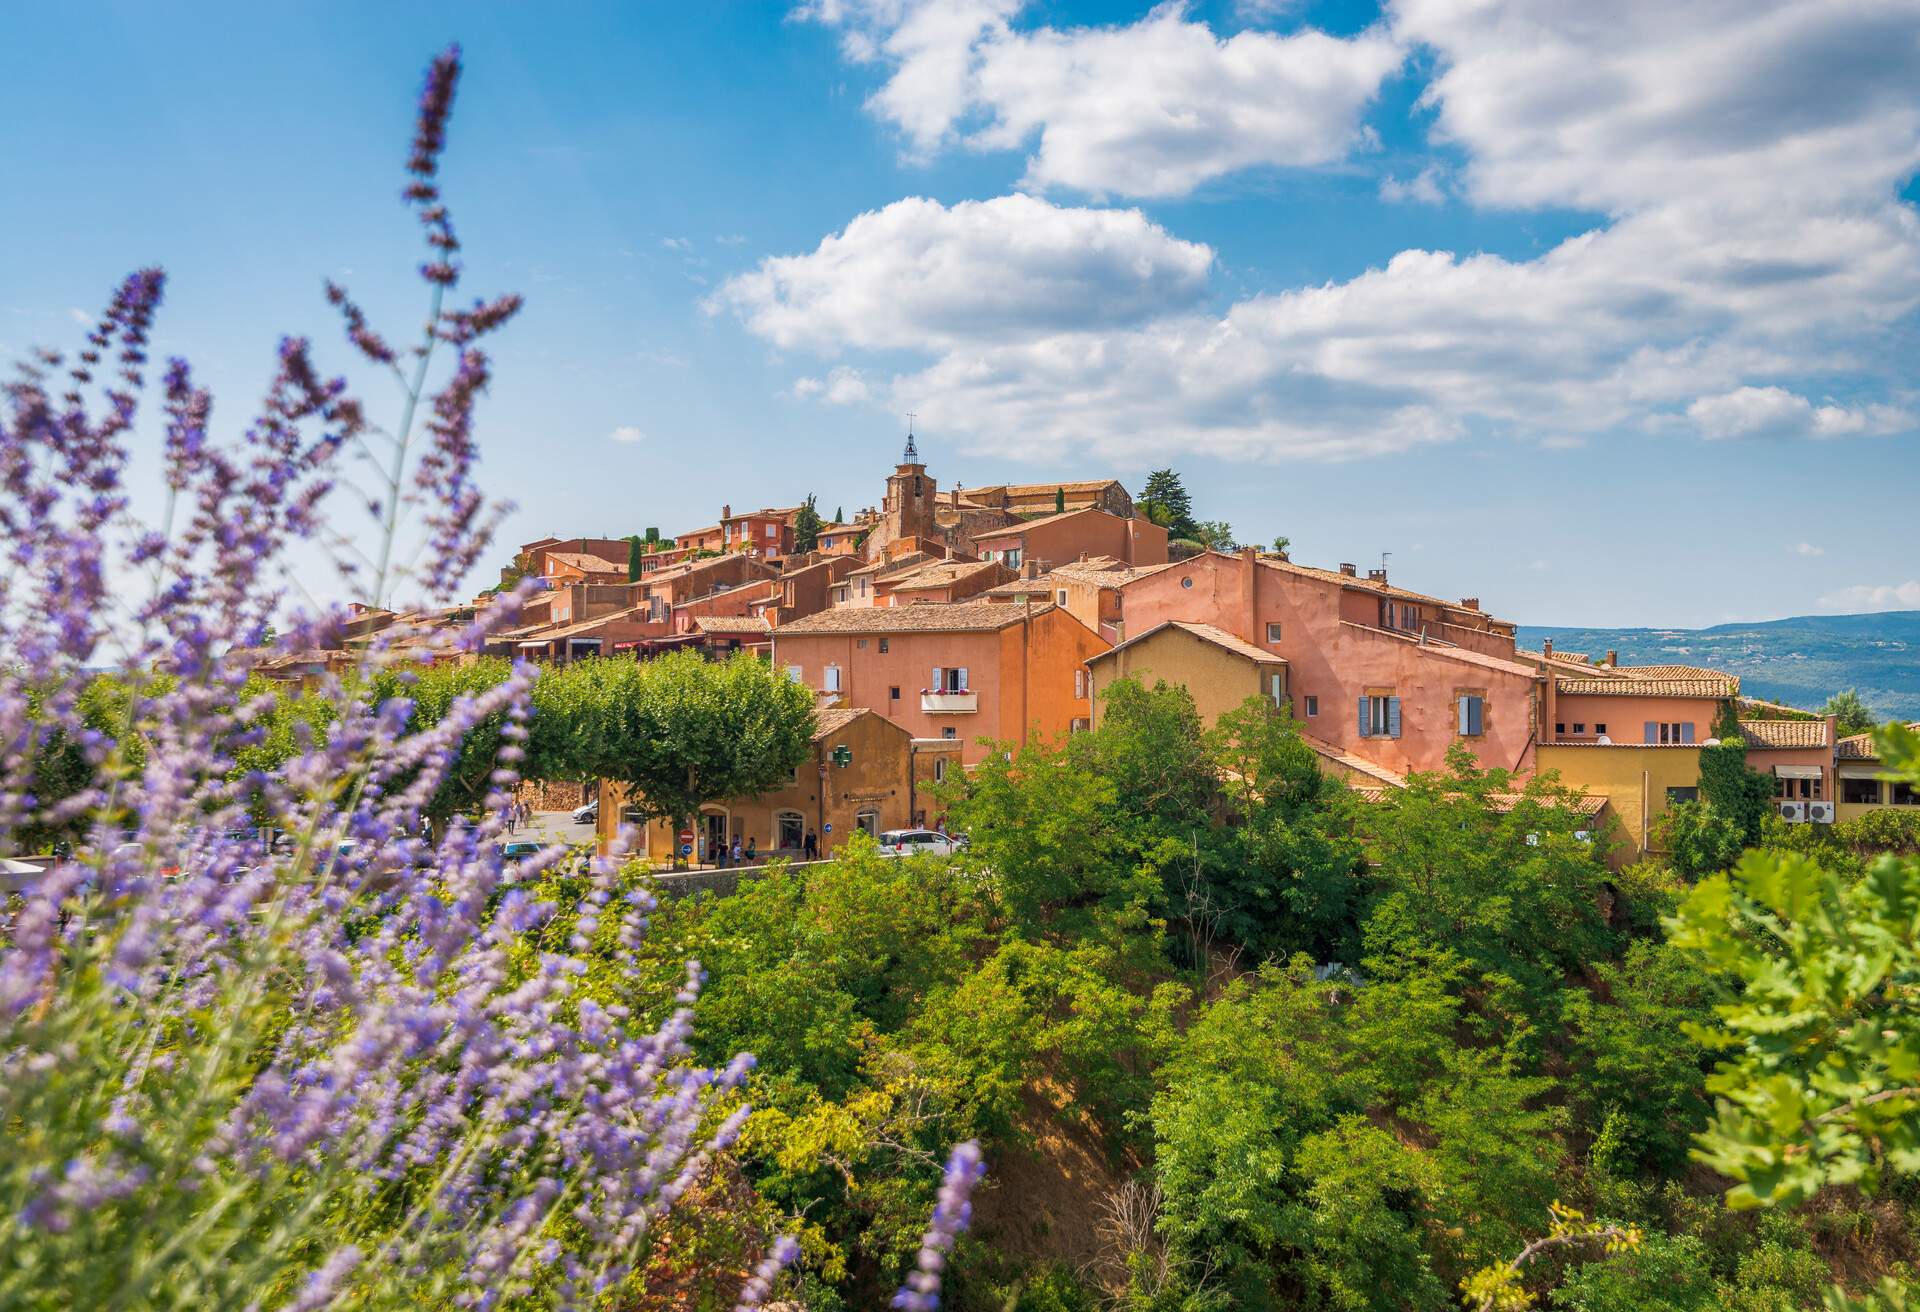 Provence, France - July 11, 2017: Roussillon is a commune in the Vaucluse department in the Provence-Alpes-Côte d'Azur region in Southeastern France. It is noted for its large ochre deposits found in the clay surrounding the village.